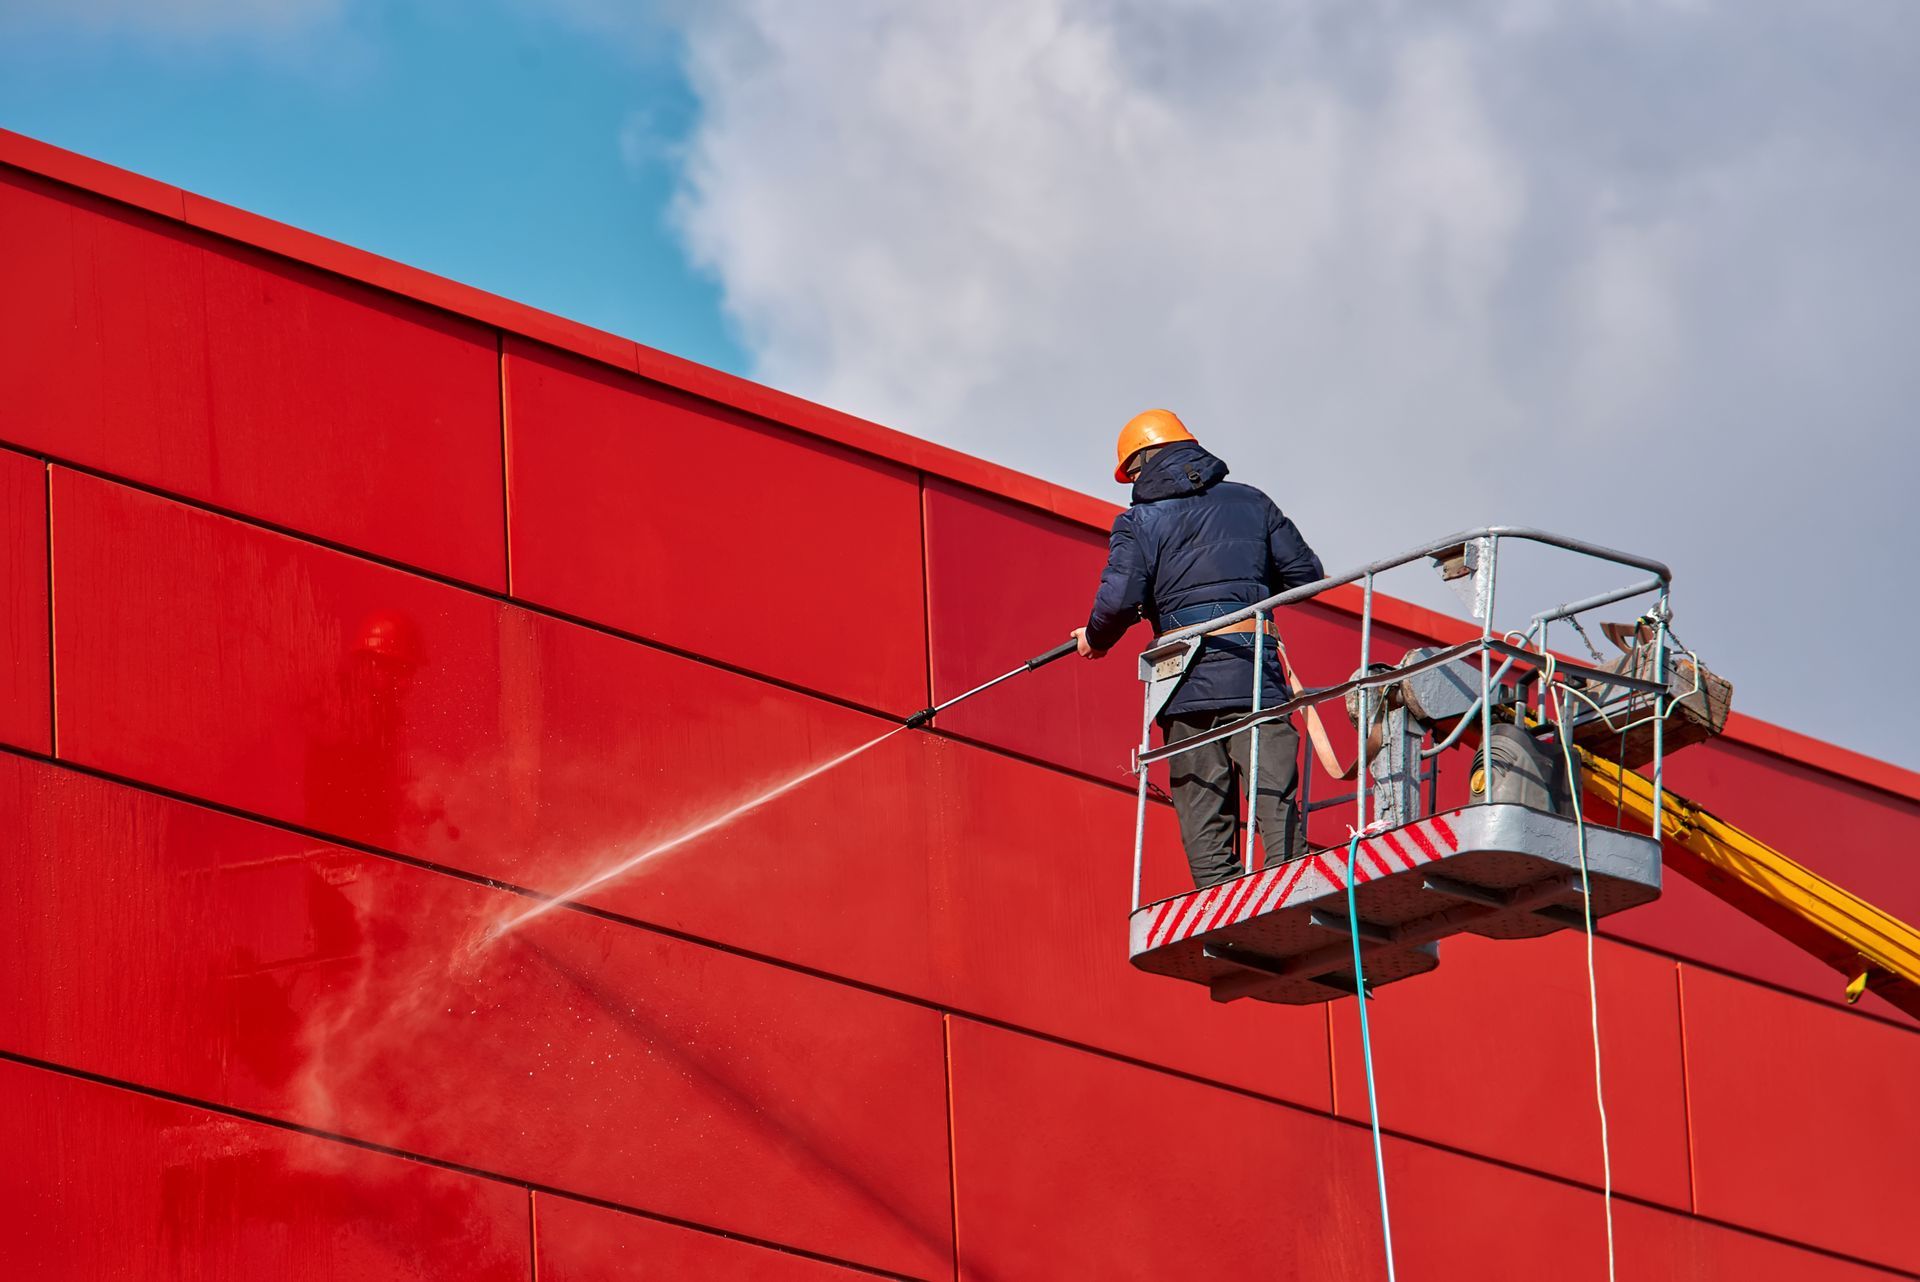 a man is cleaning a red building with a high pressure washer